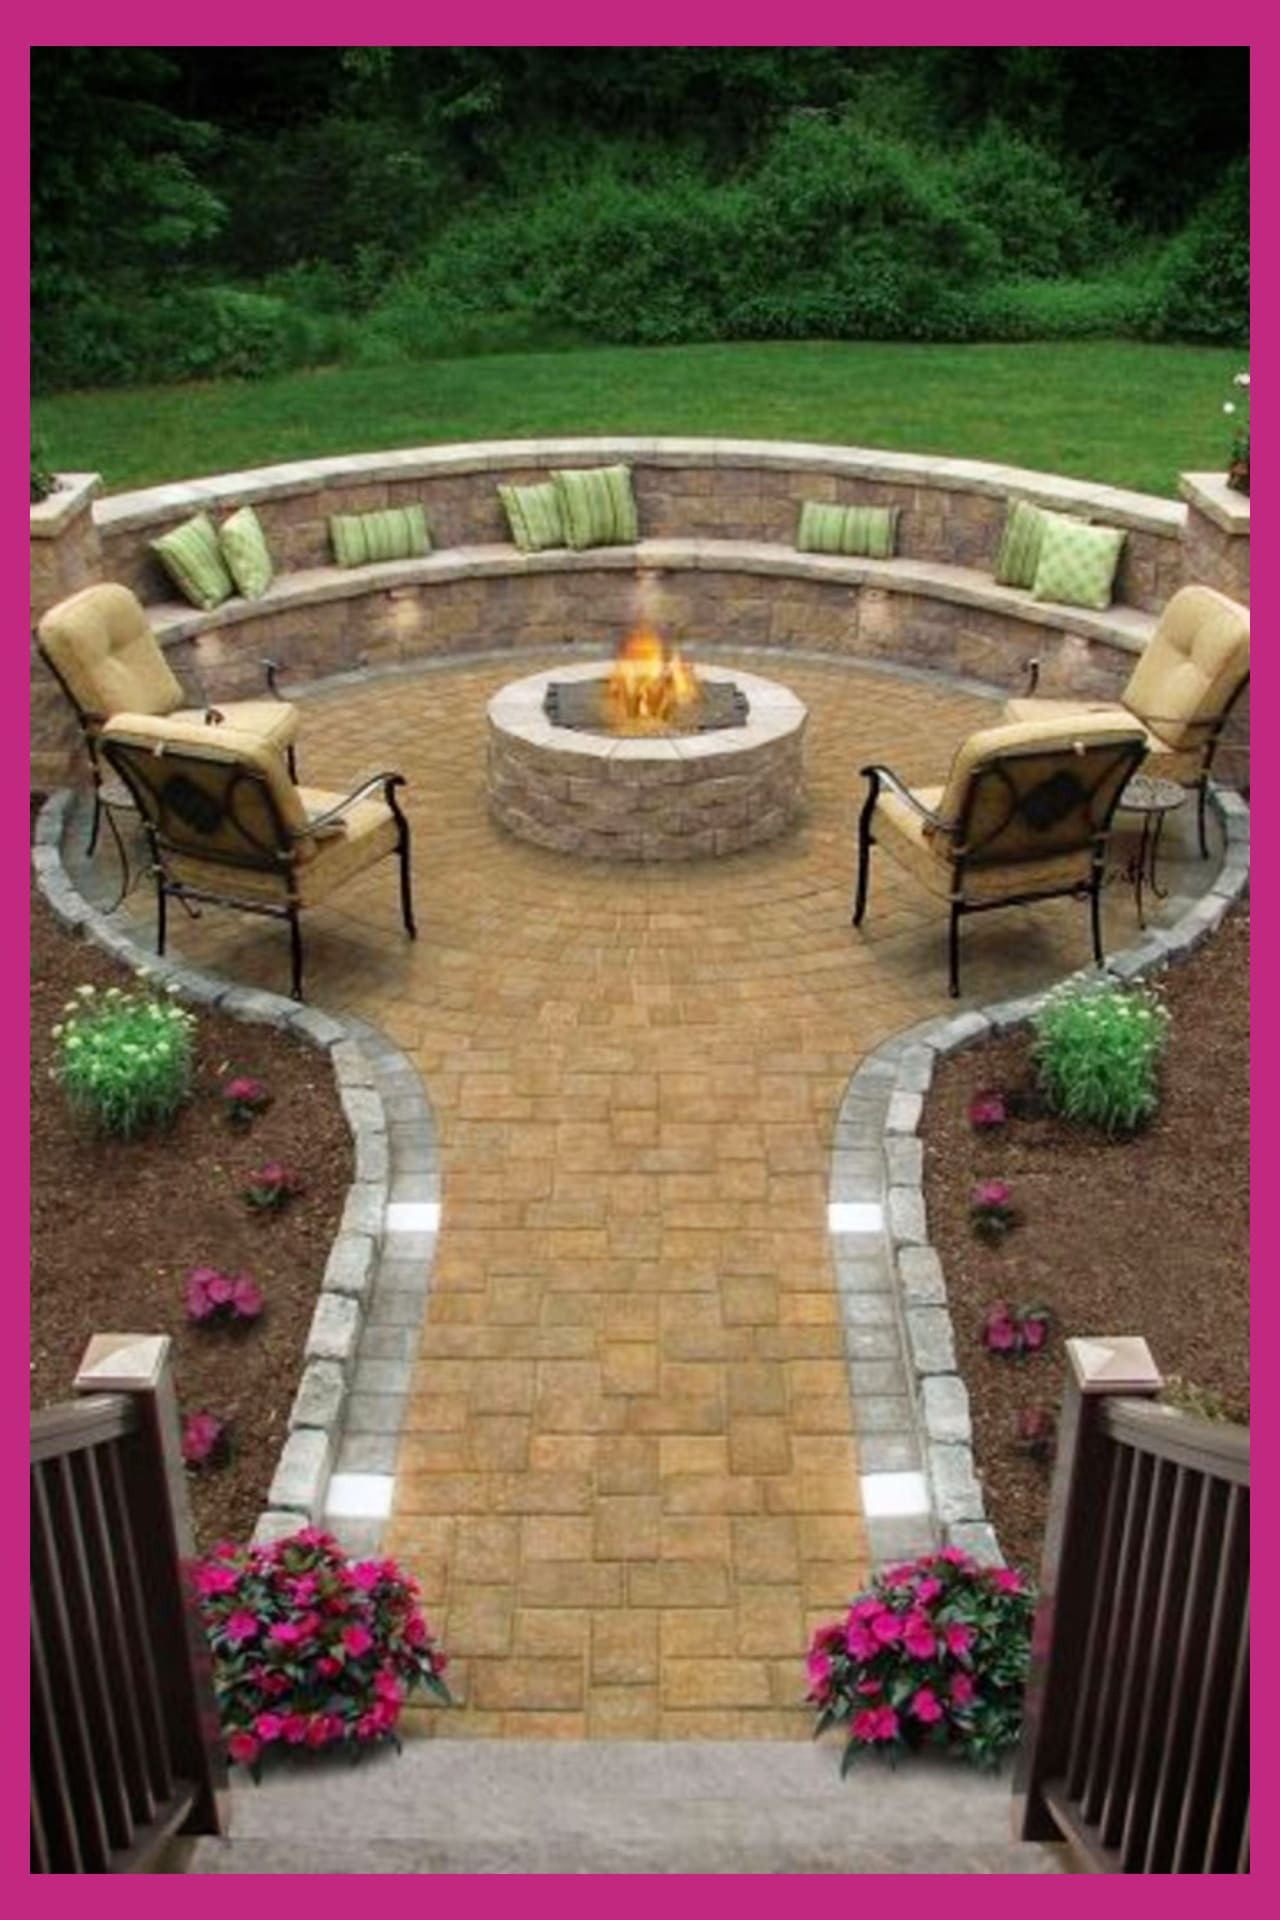 Deck Fire Pit Ideas
 Backyard Fire Pit Ideas and Designs for Your Yard Deck or